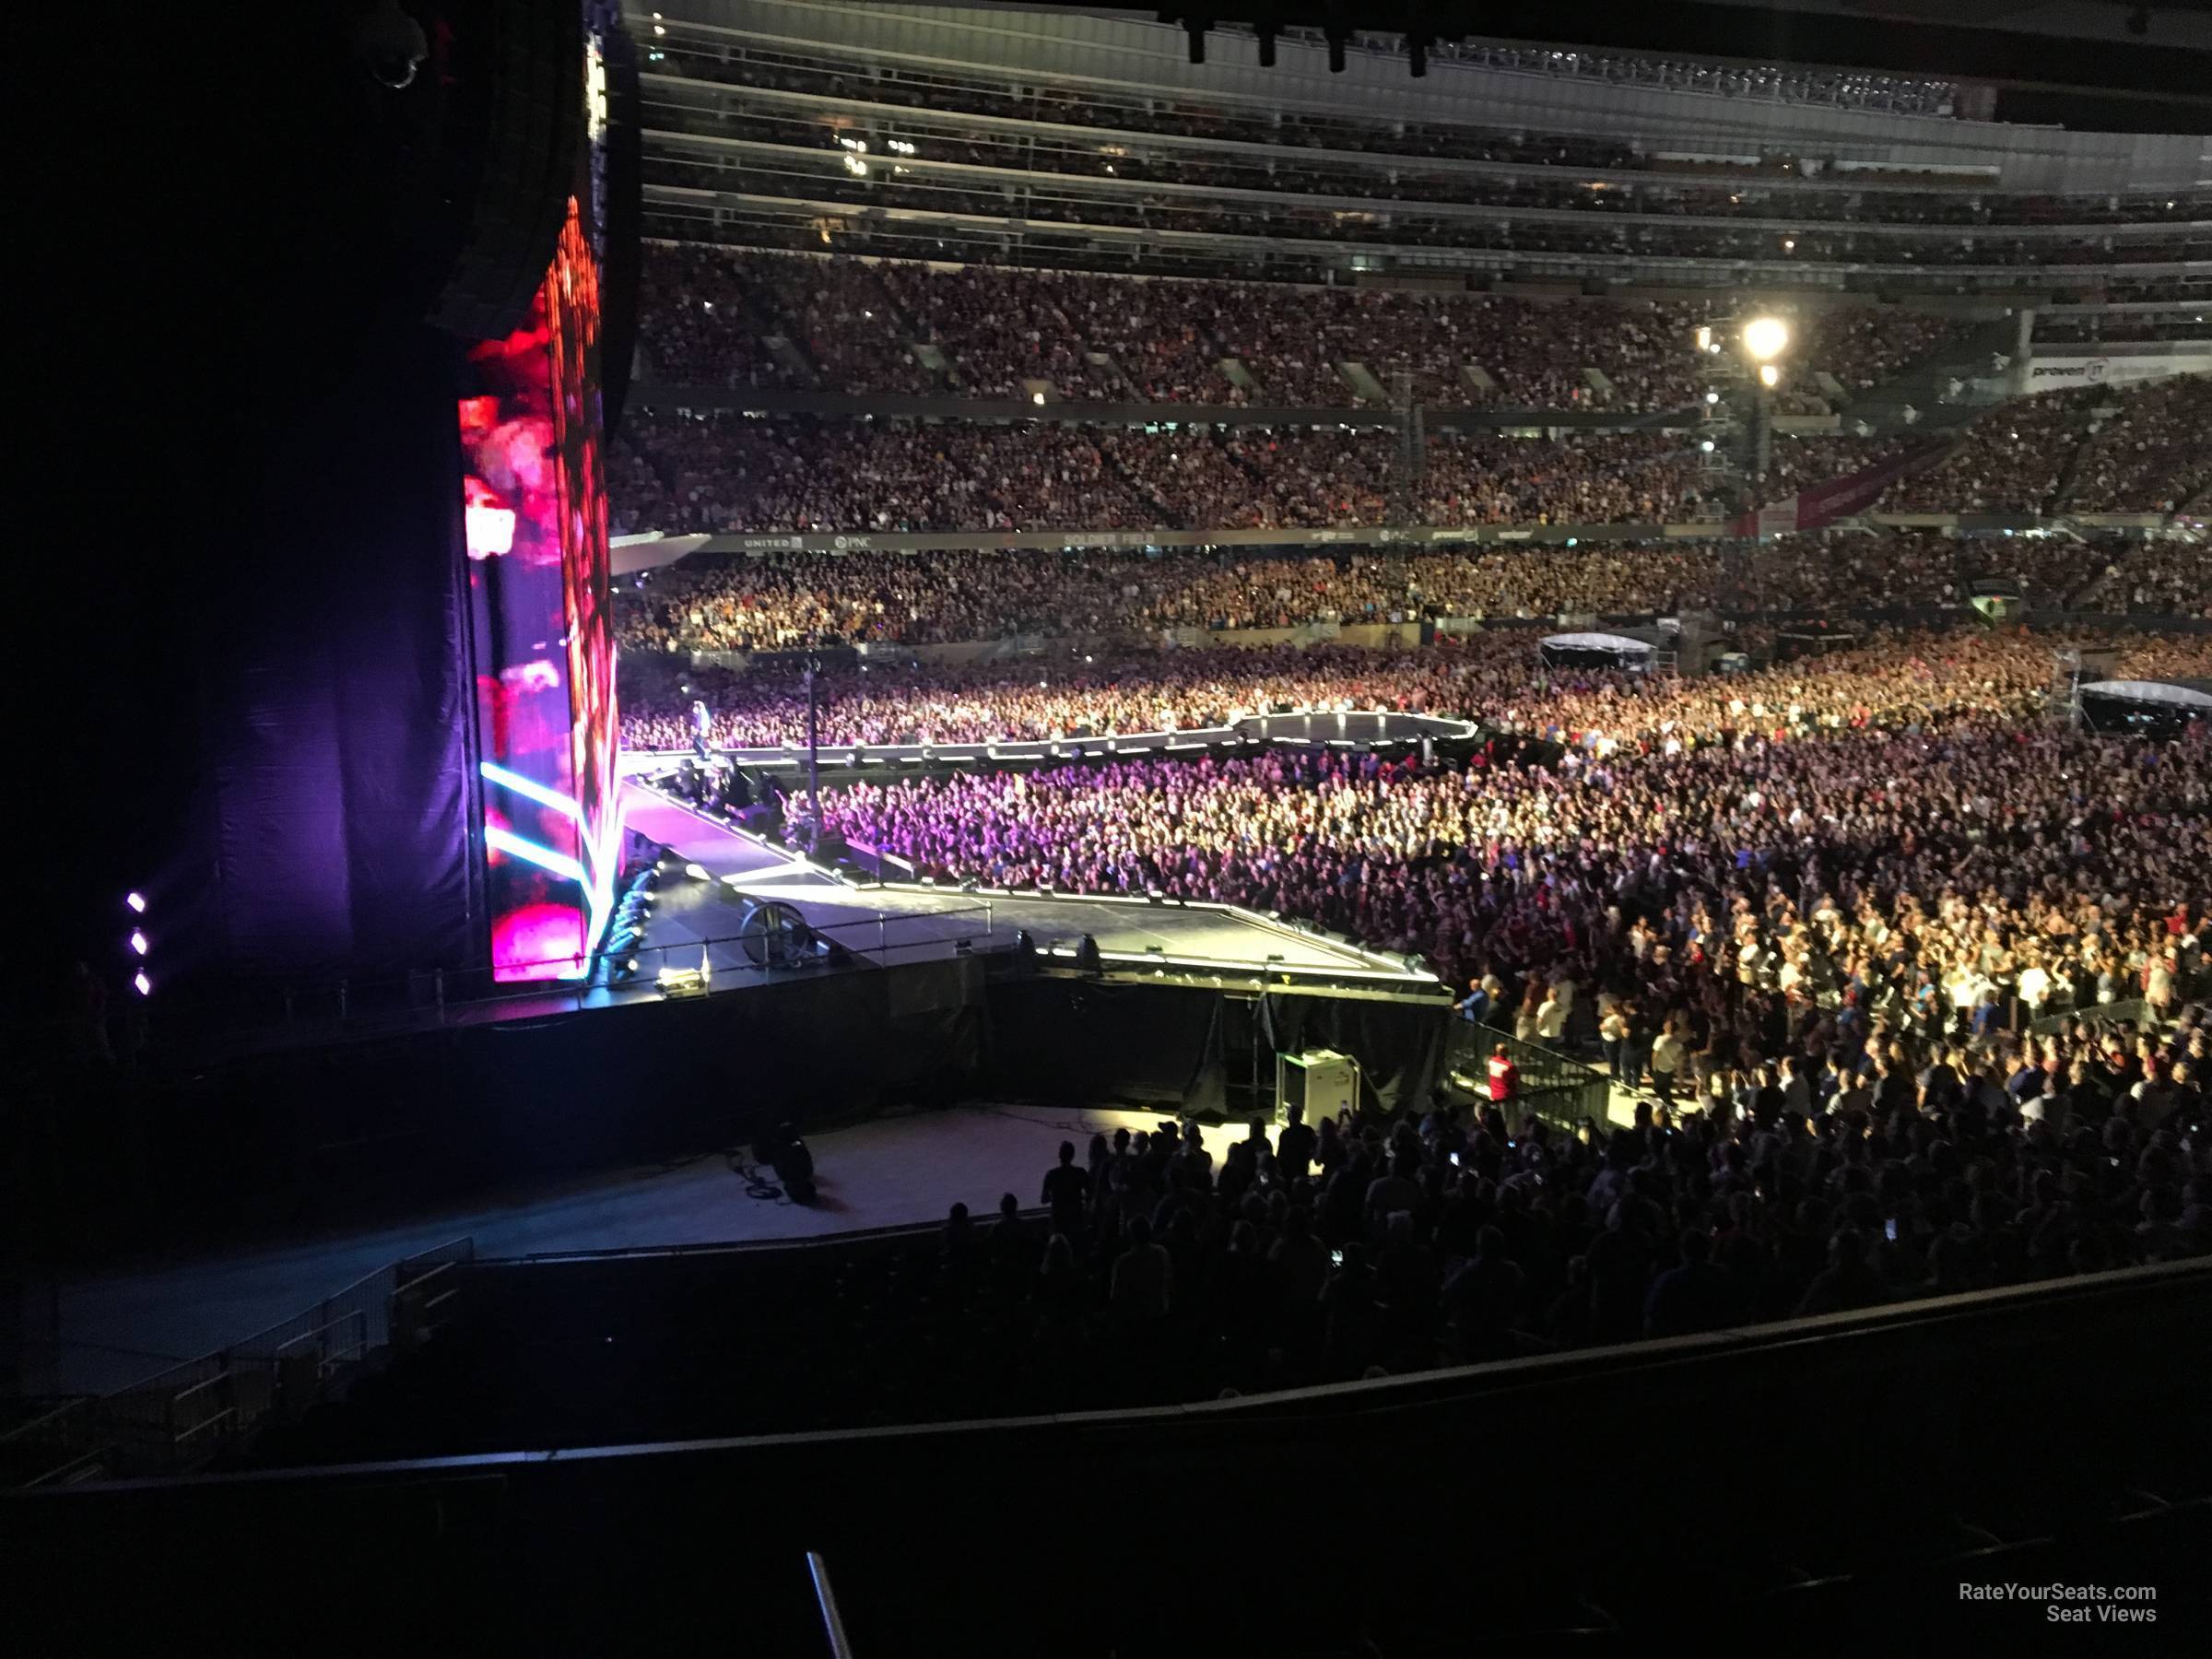 section 244, row 4 seat view  for concert - soldier field